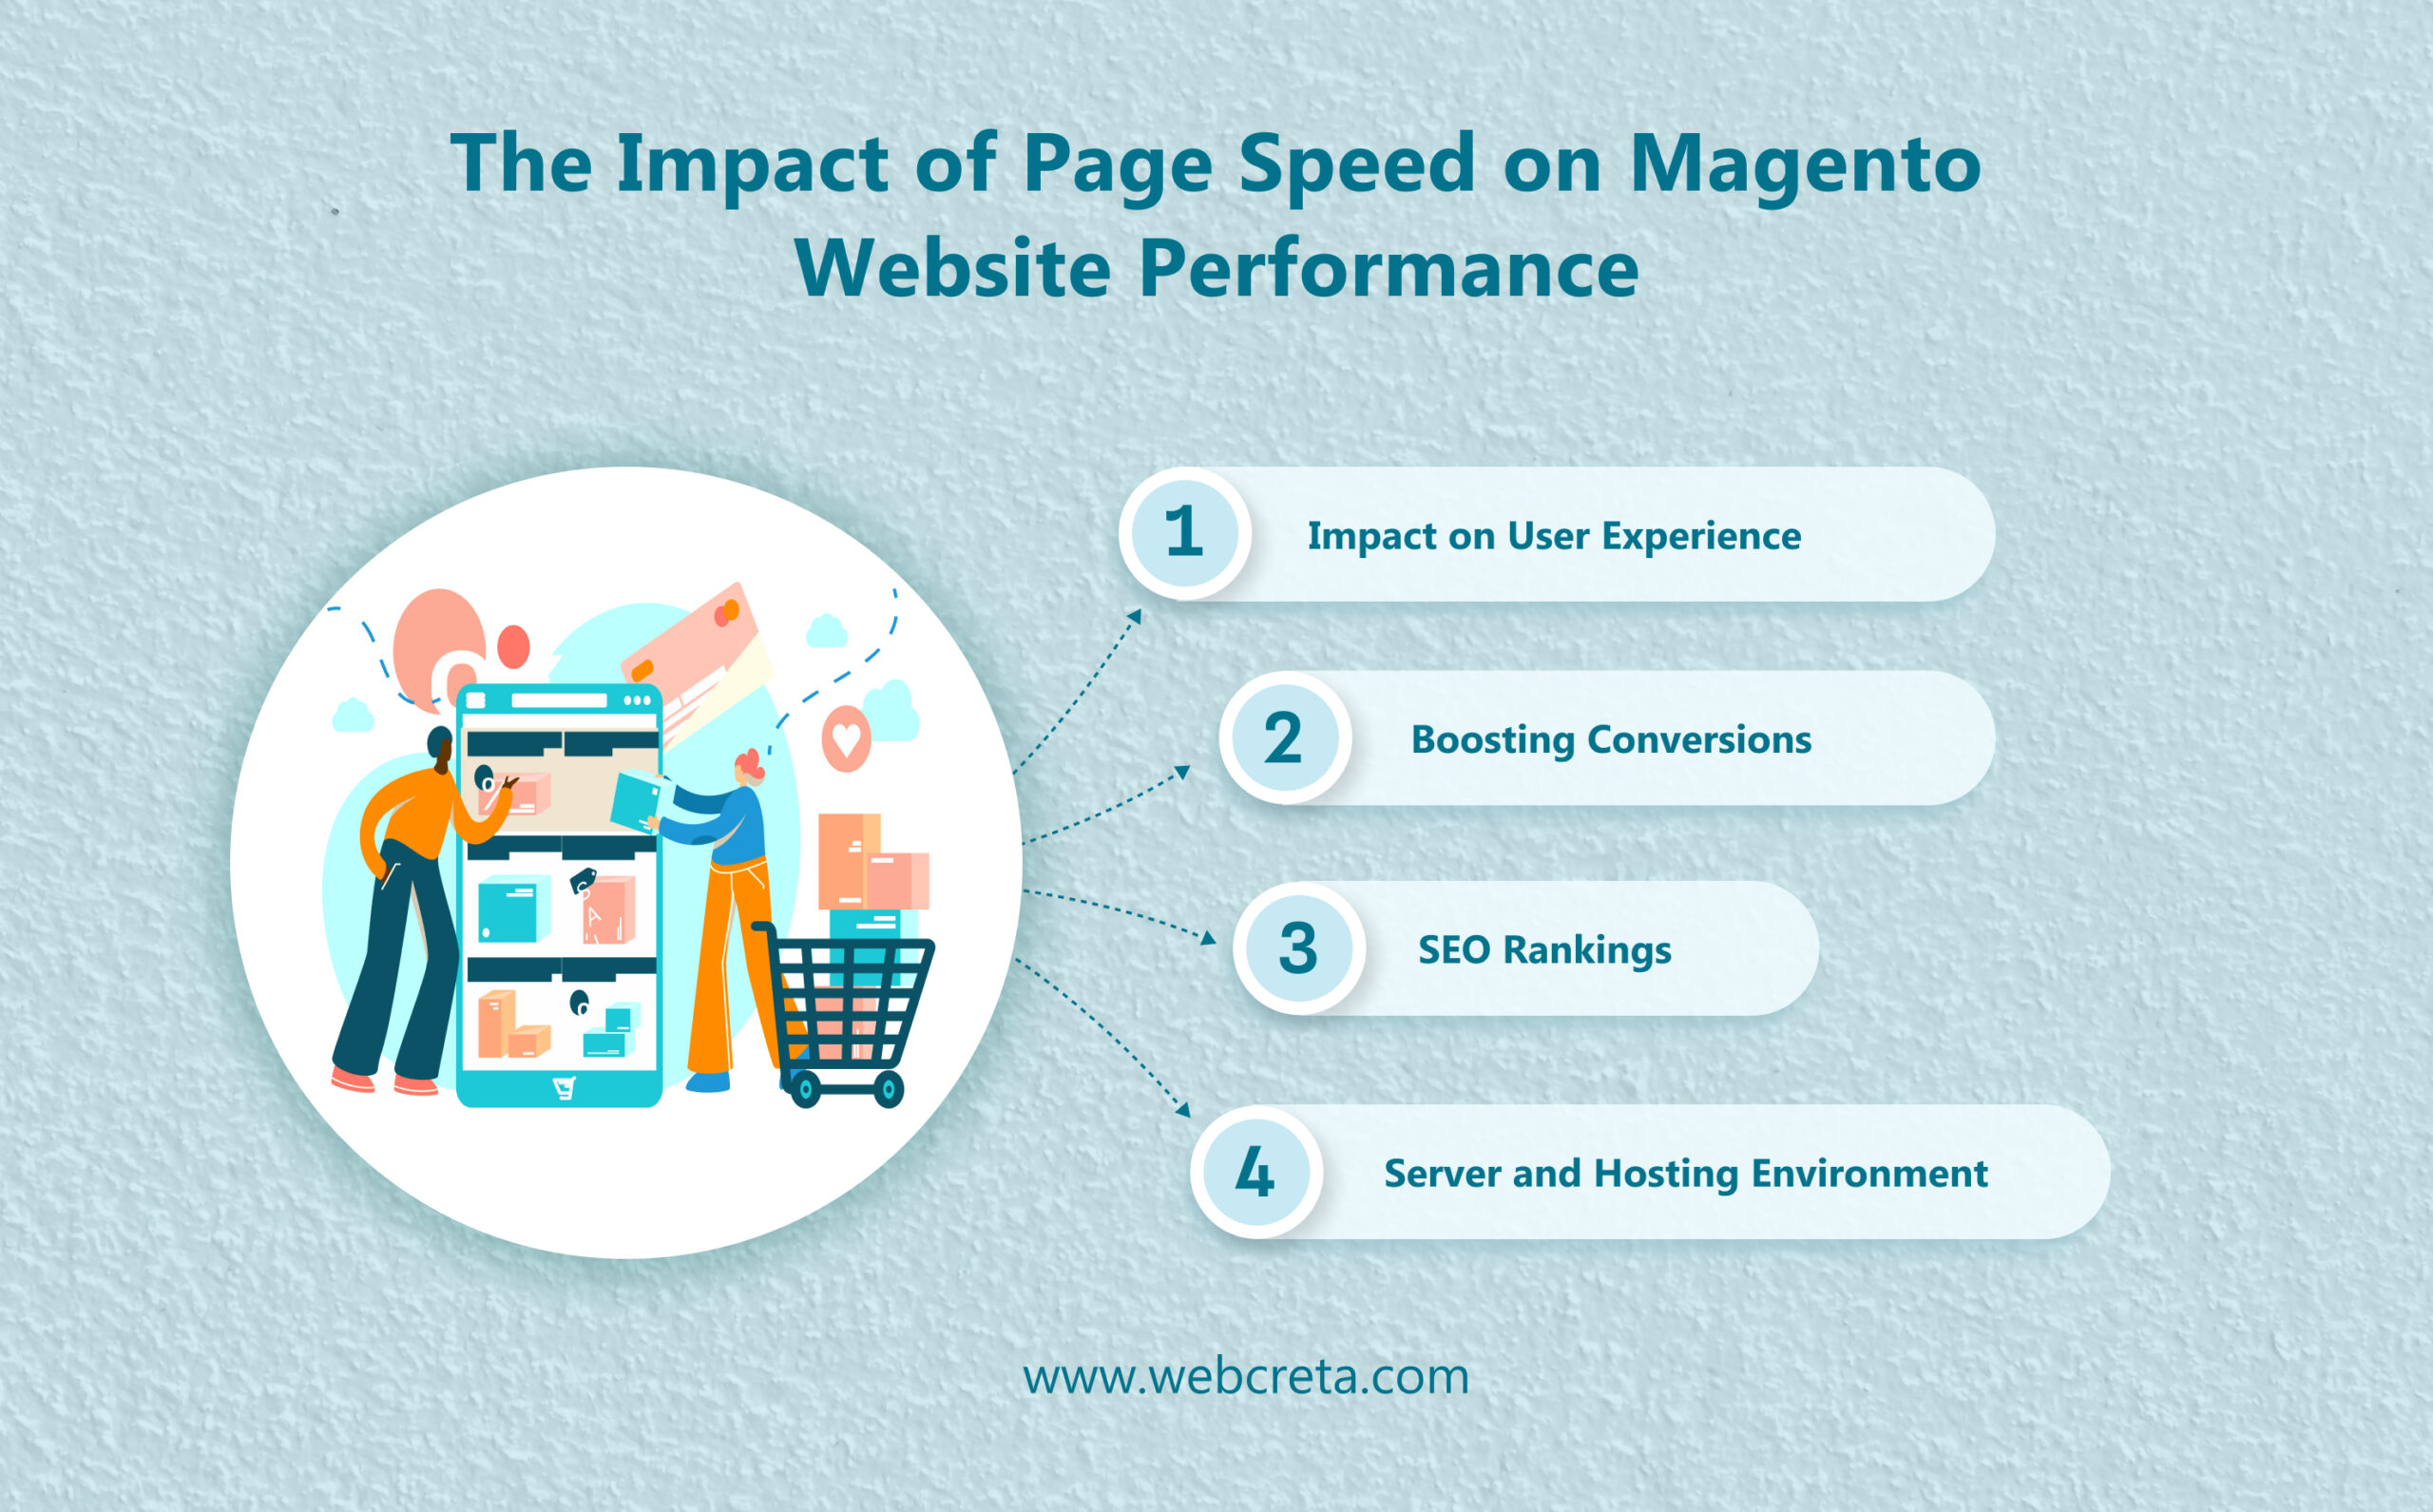 The Impact of Page Speed on Magento Website Performance